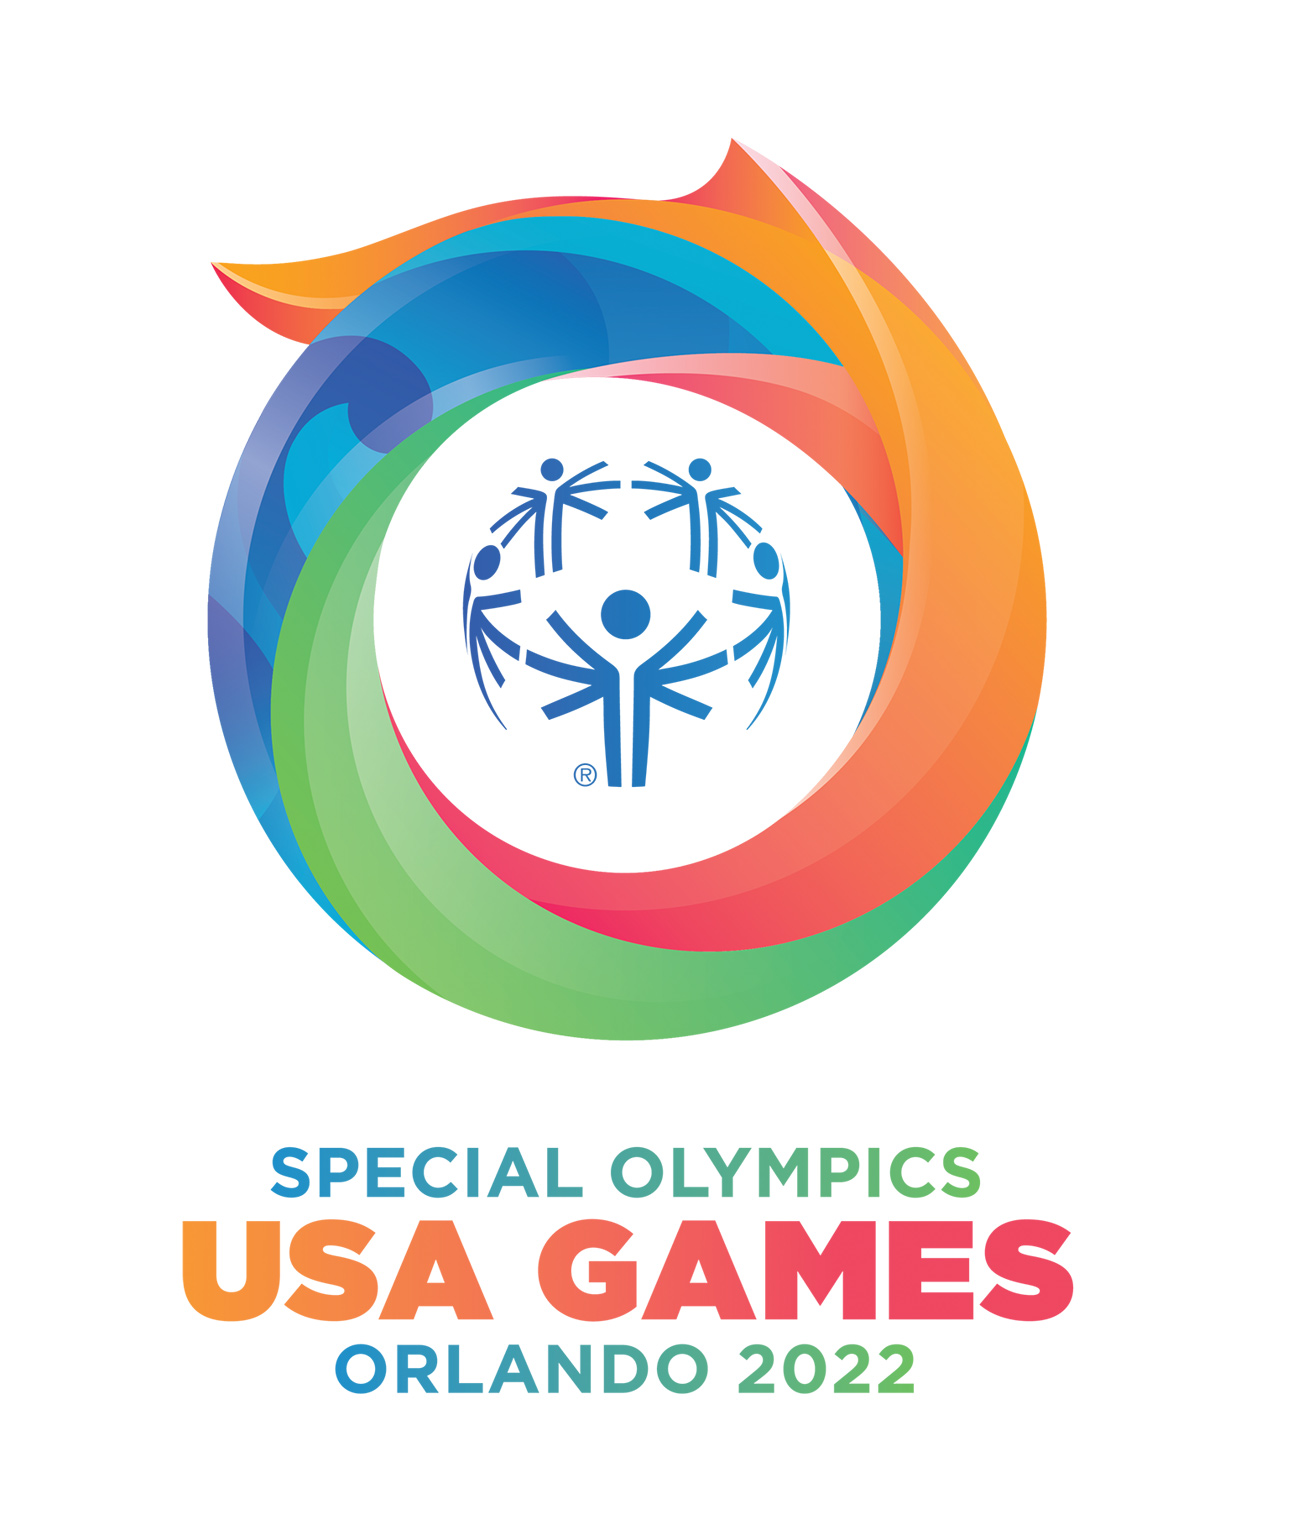 2022-special-olympics-usa-games-logo-an-inspiration-to-society